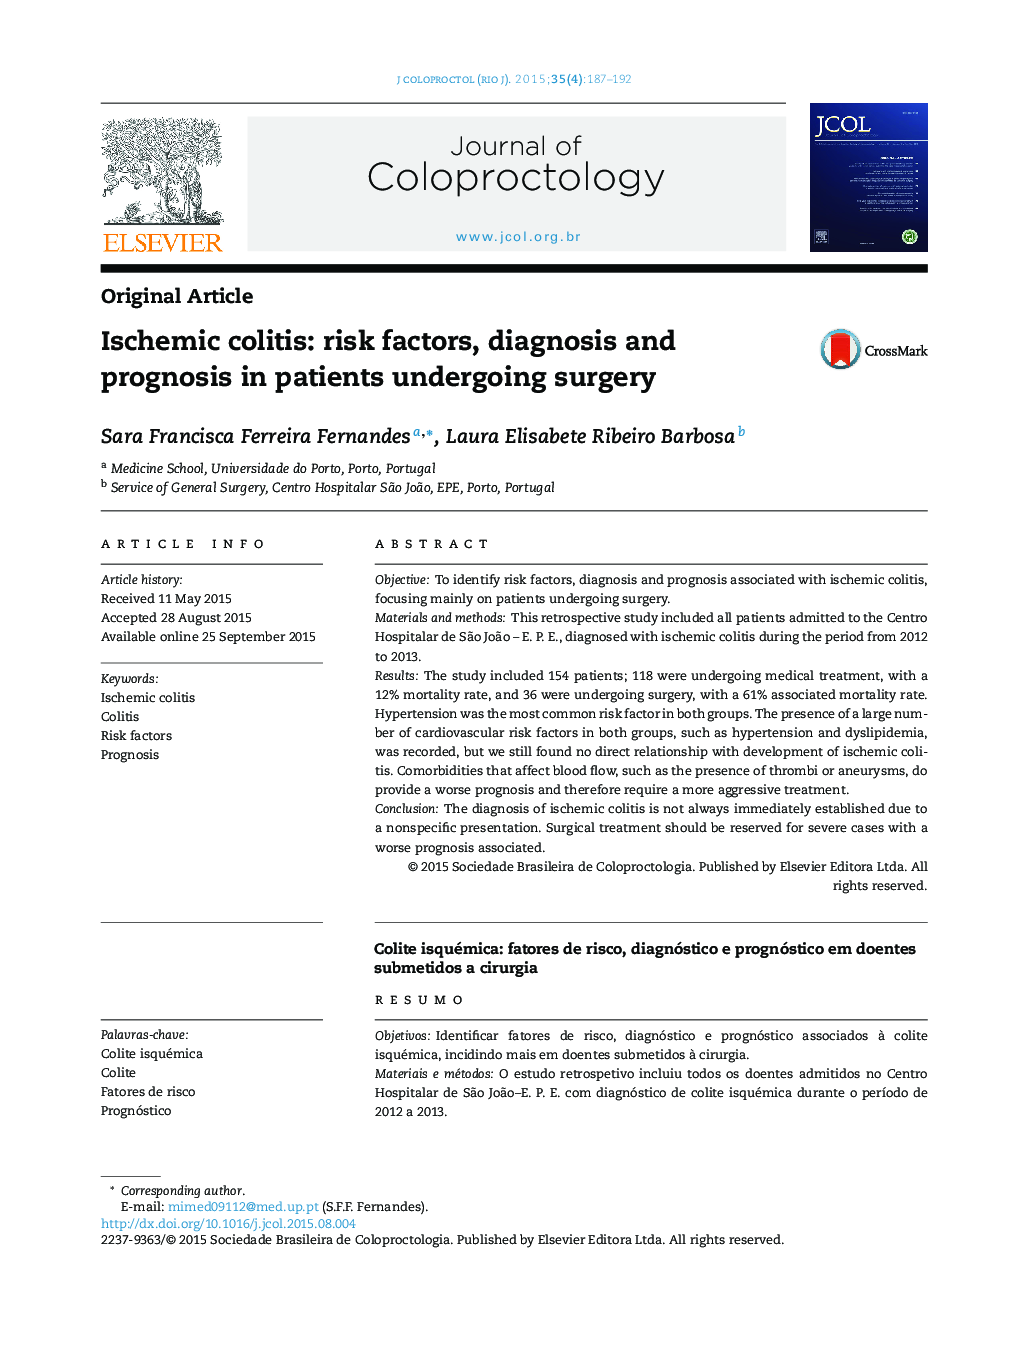 Ischemic colitis: risk factors, diagnosis and prognosis in patients undergoing surgery